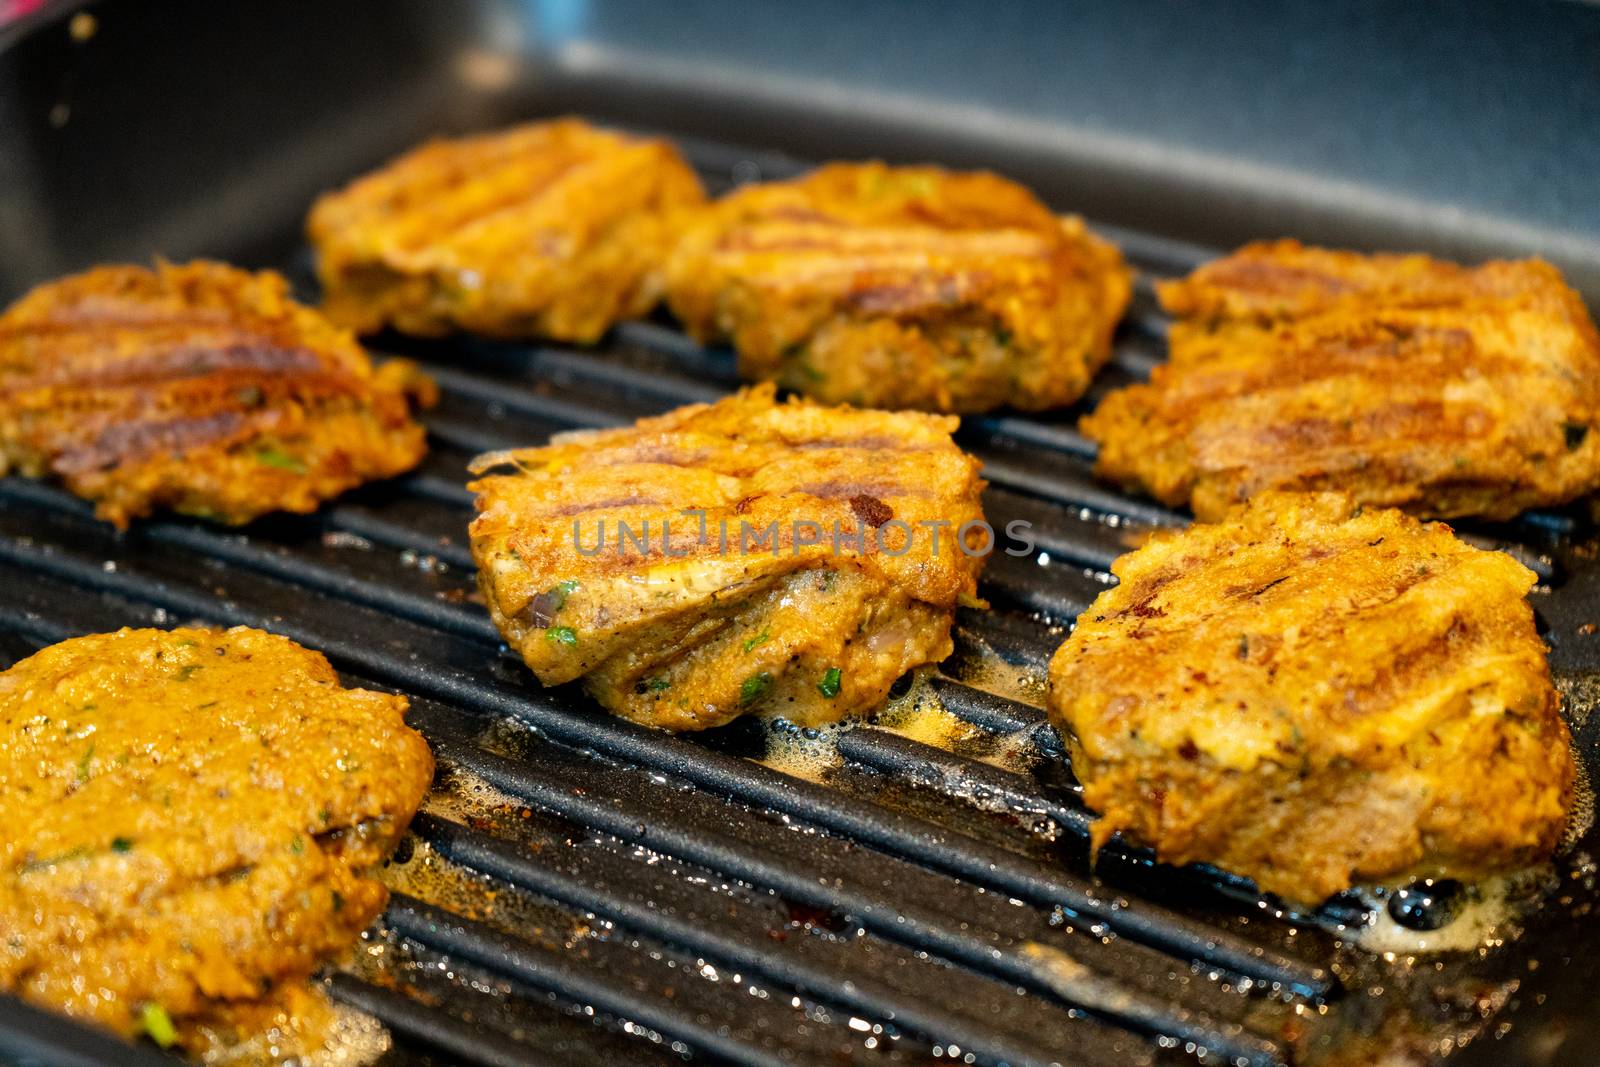 Shallow depth of feild shot mince meat mutton patties keema roasting on a pan with oil bubbling out as they get charred . Shows an easy hearty home meal with protein and barbeque.